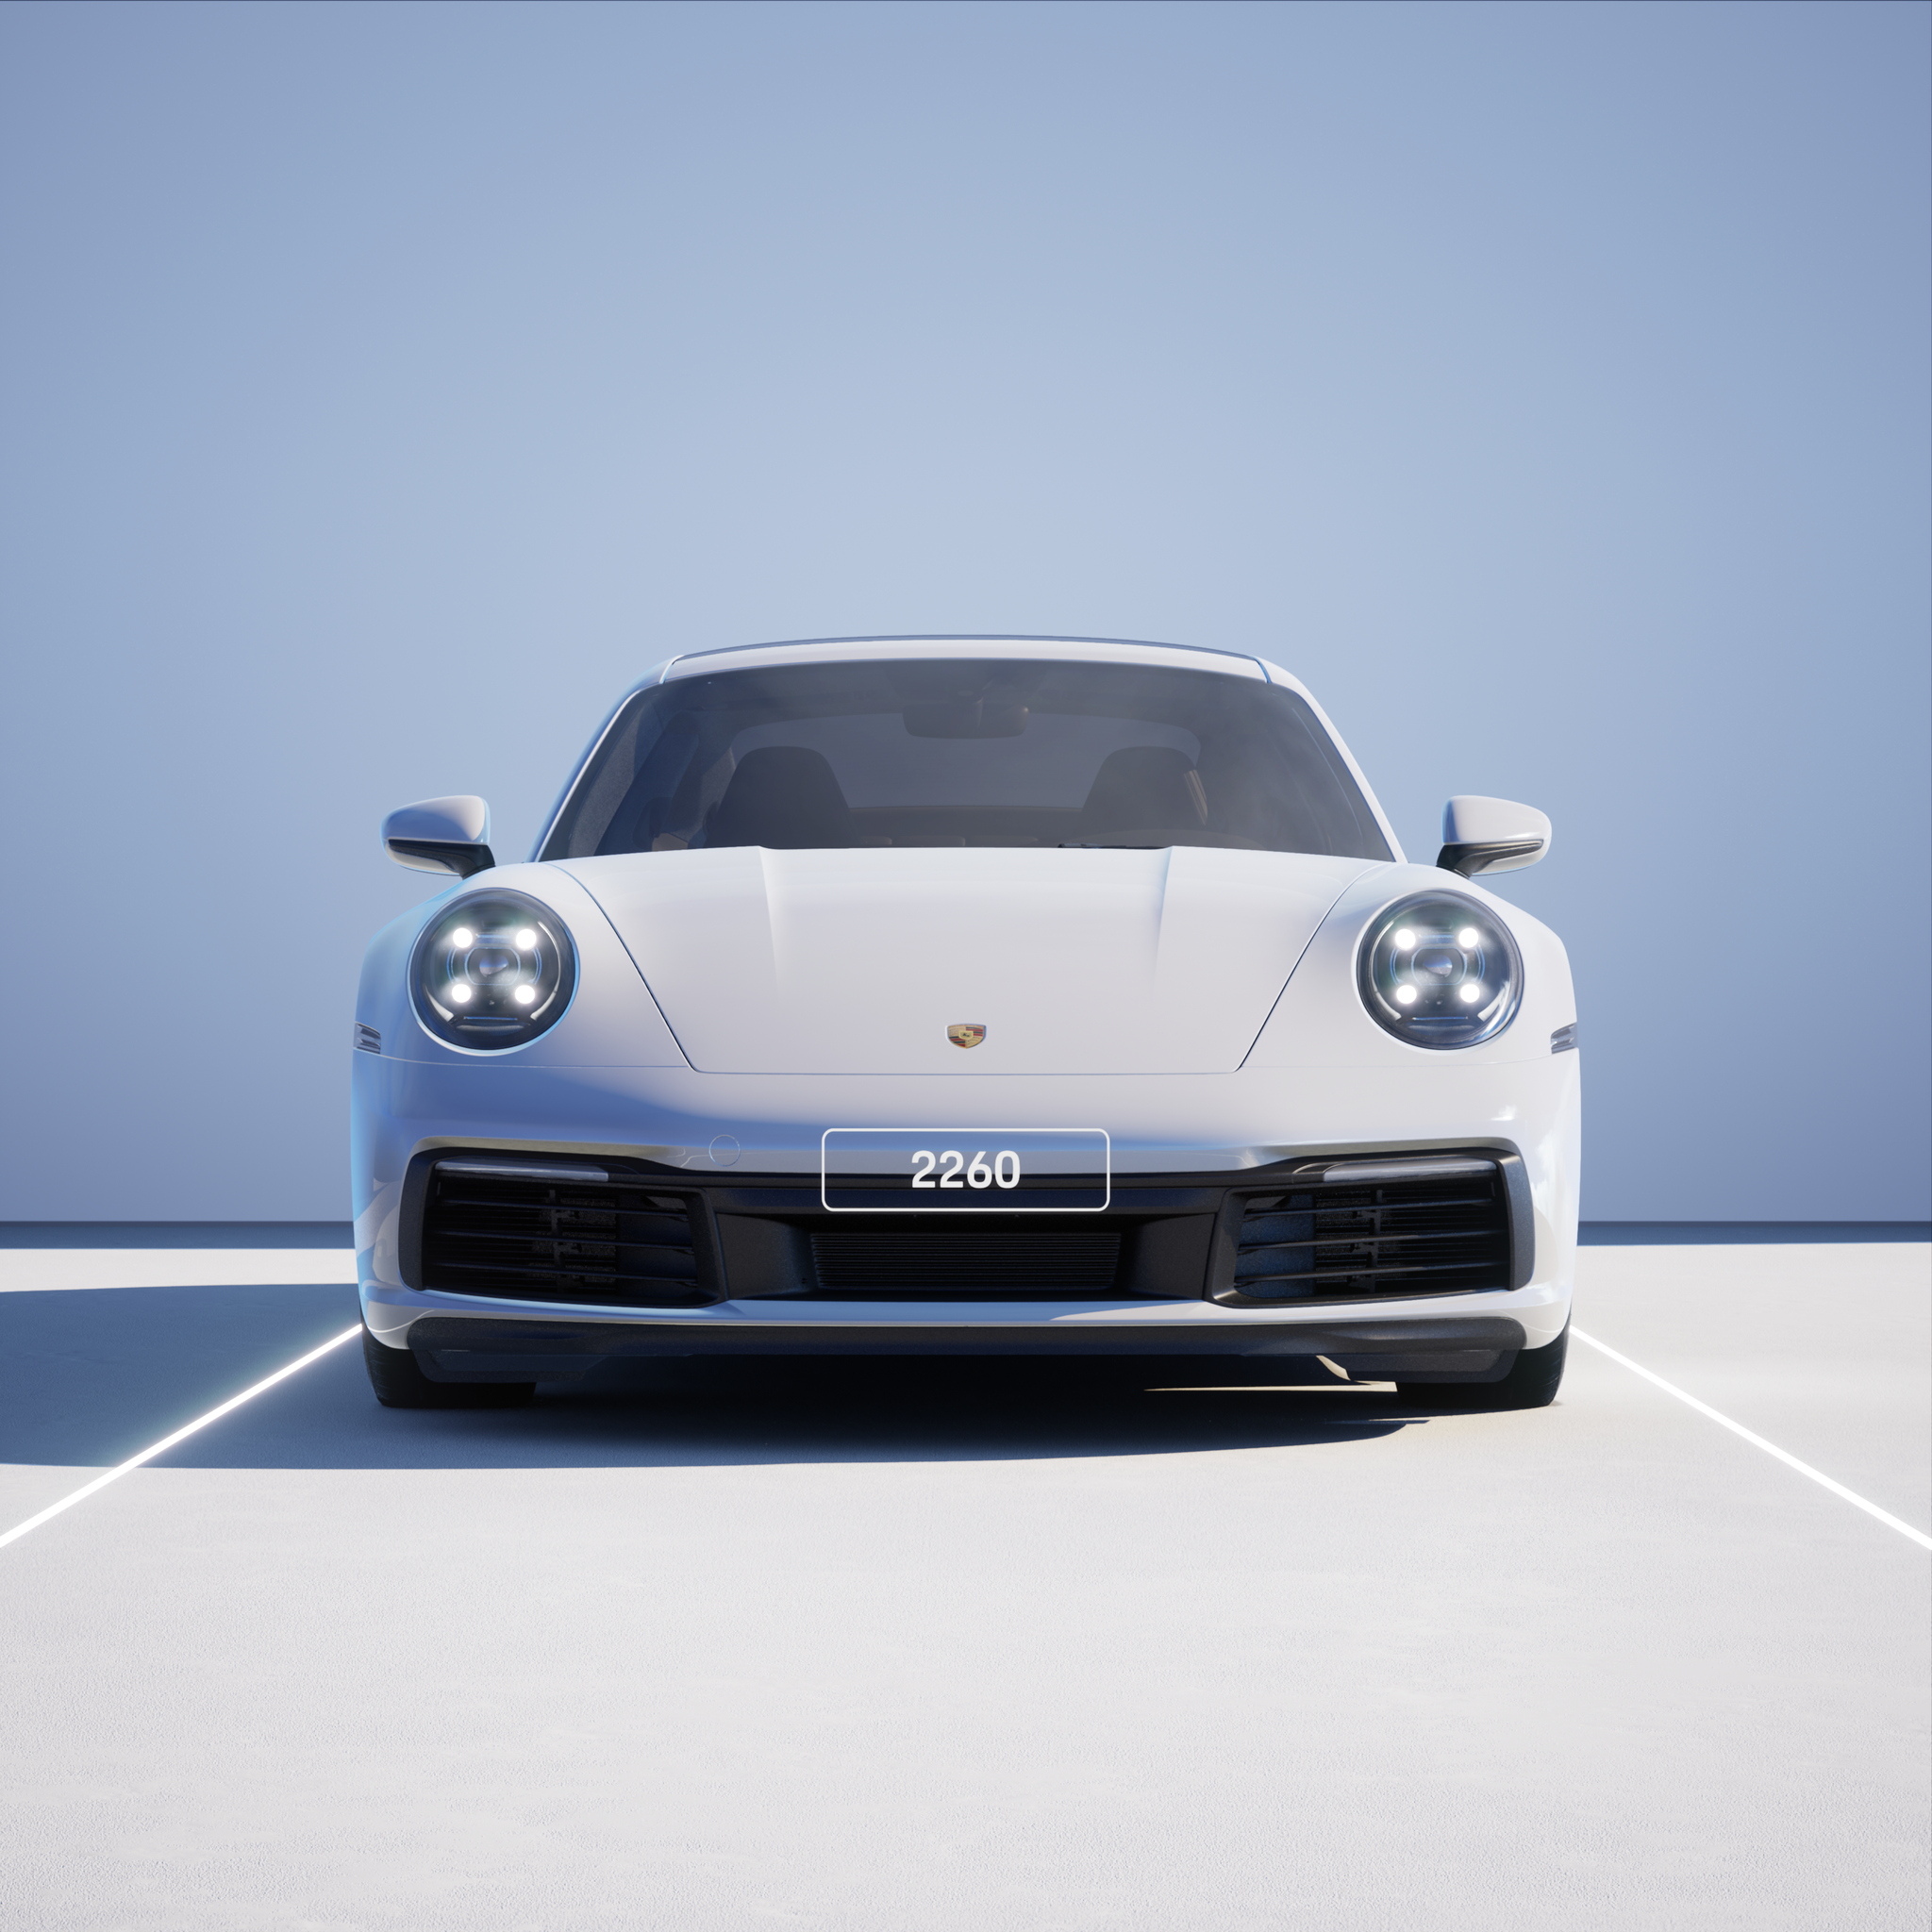 The PORSCHΞ 911 2260 image in phase